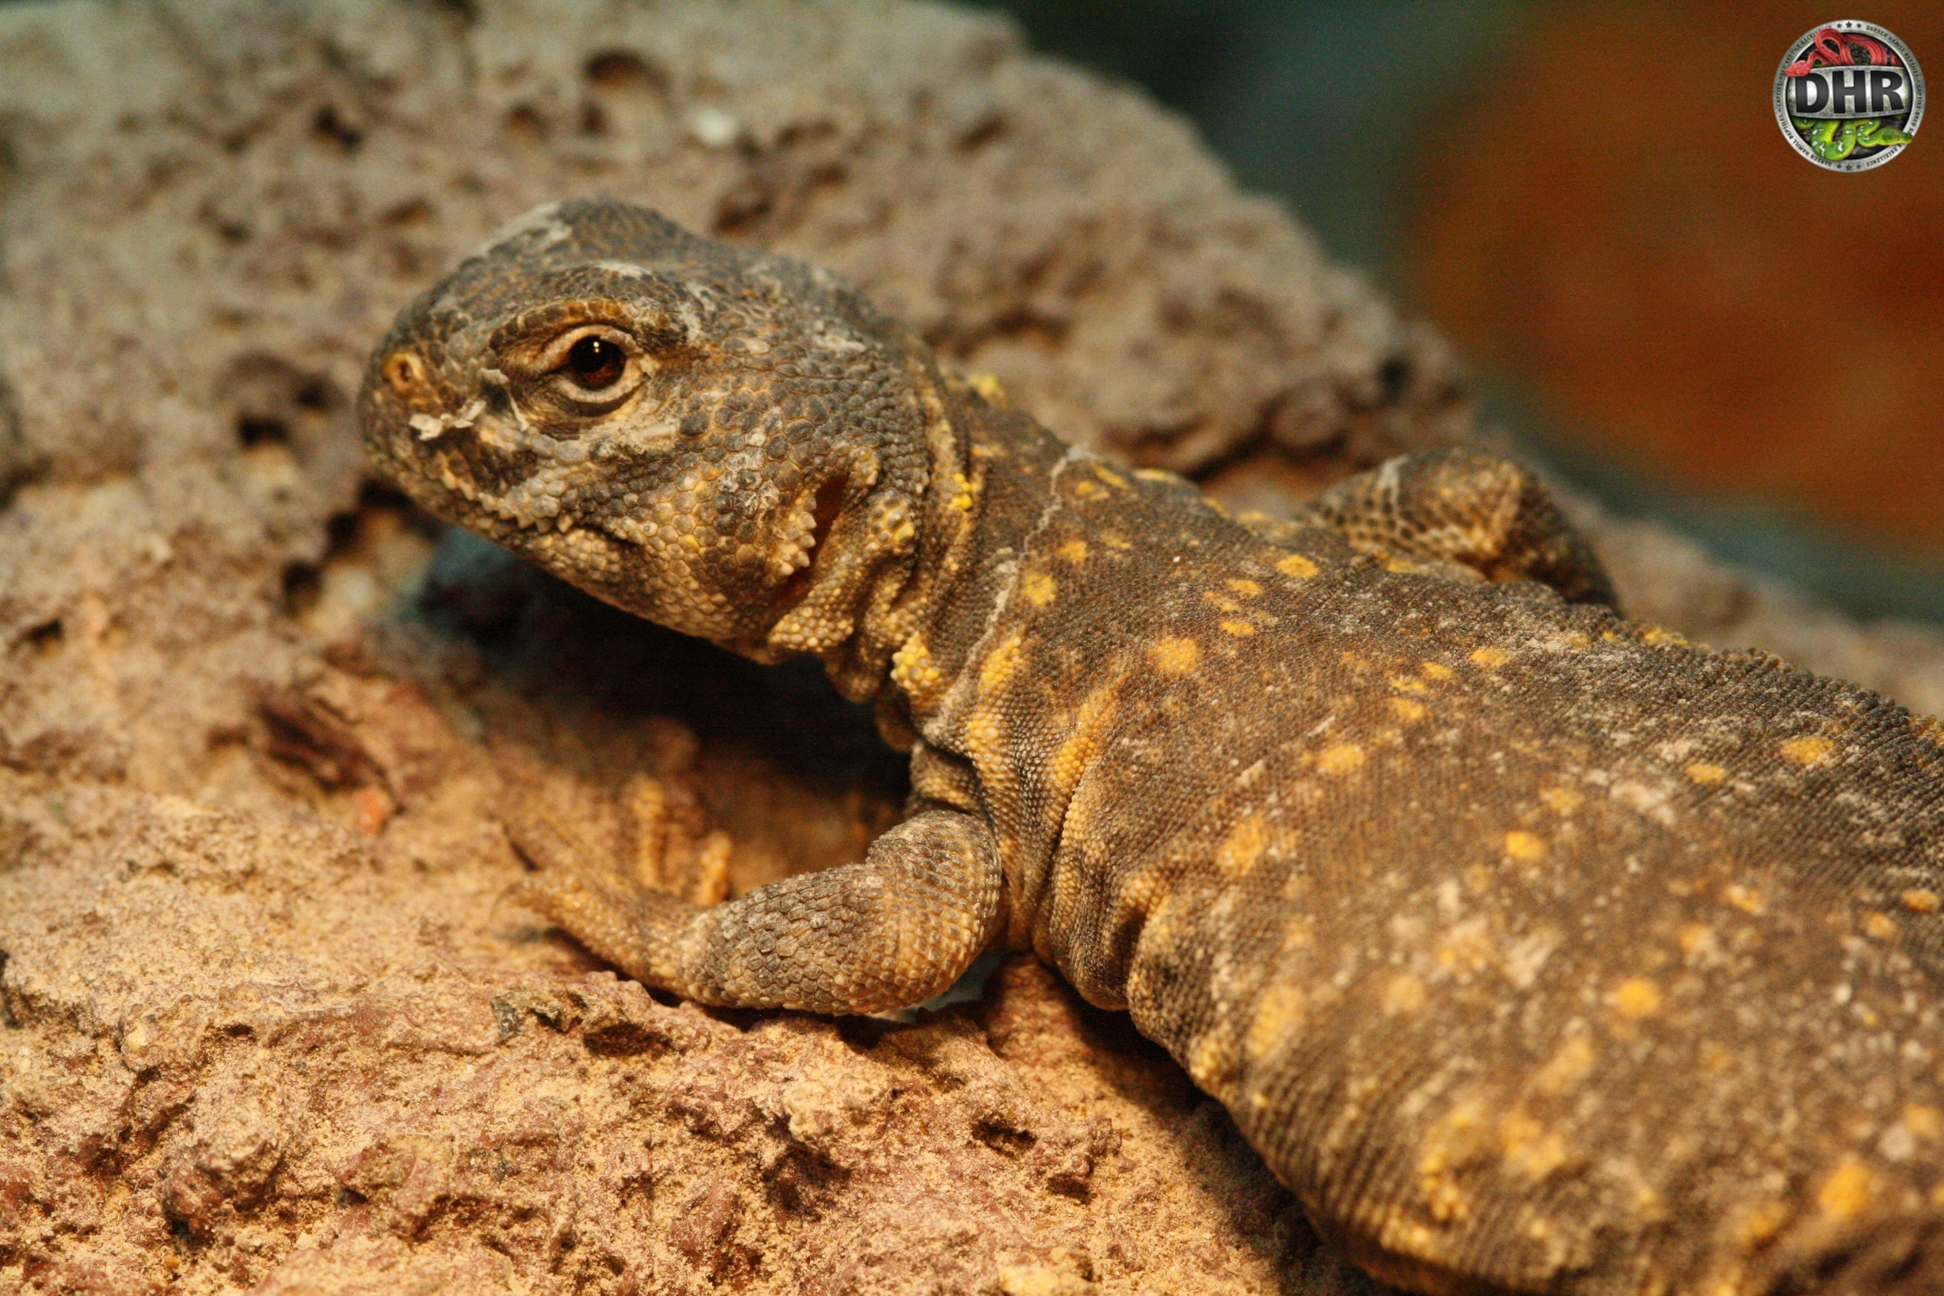 A Young Uromastyx sunbathing